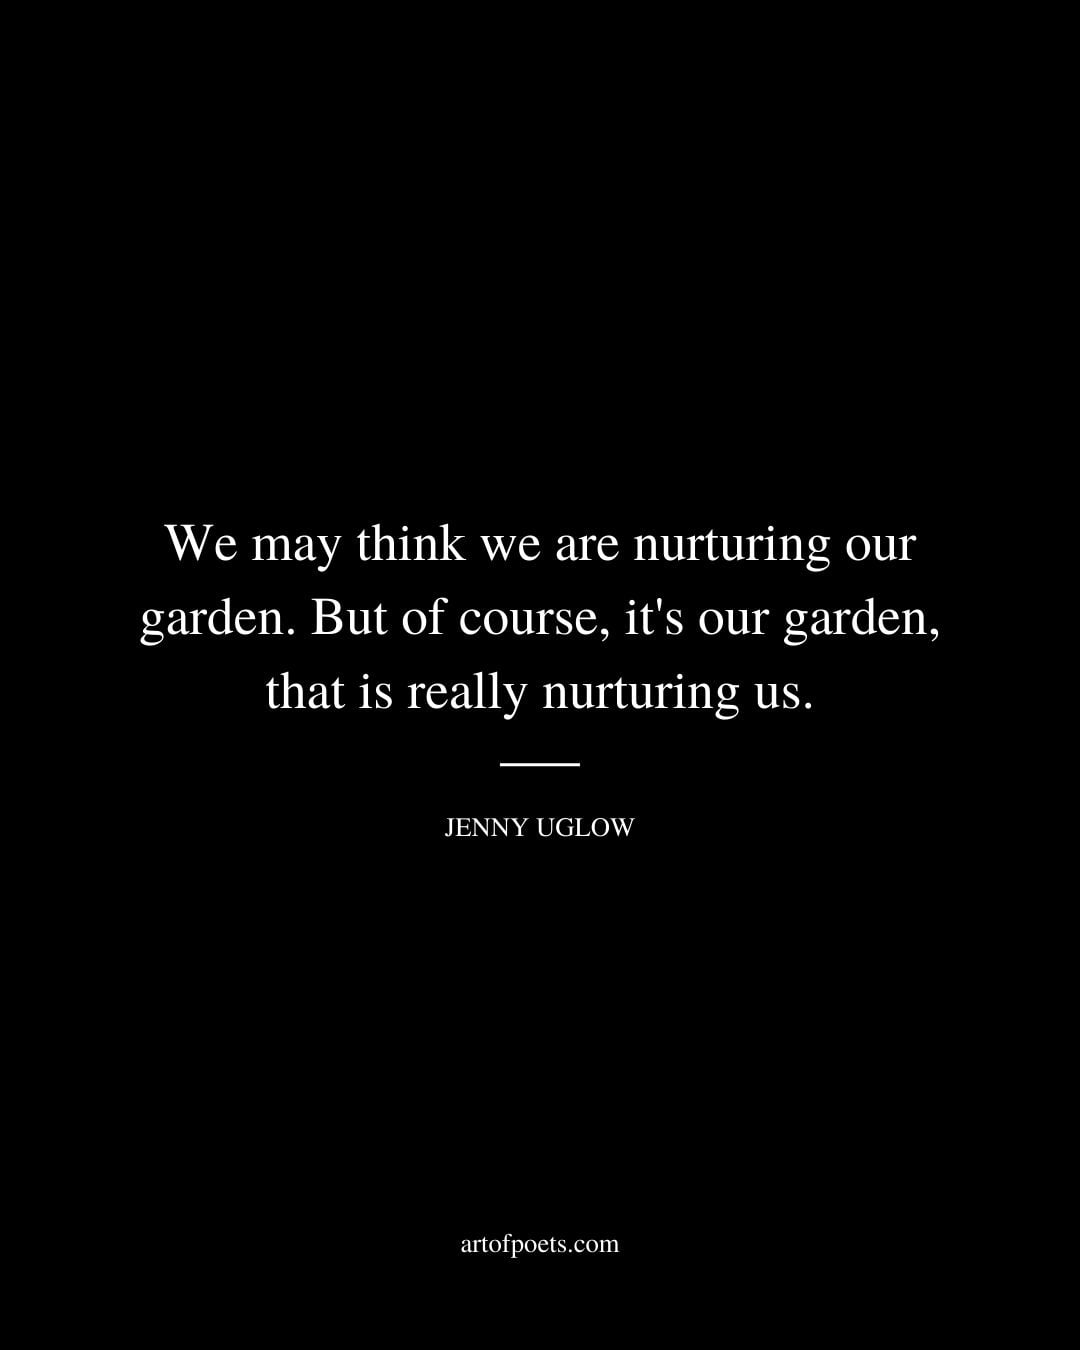 We may think we are nurturing our garden. But of course its our garden that is really nurturing us. Jenny Uglow